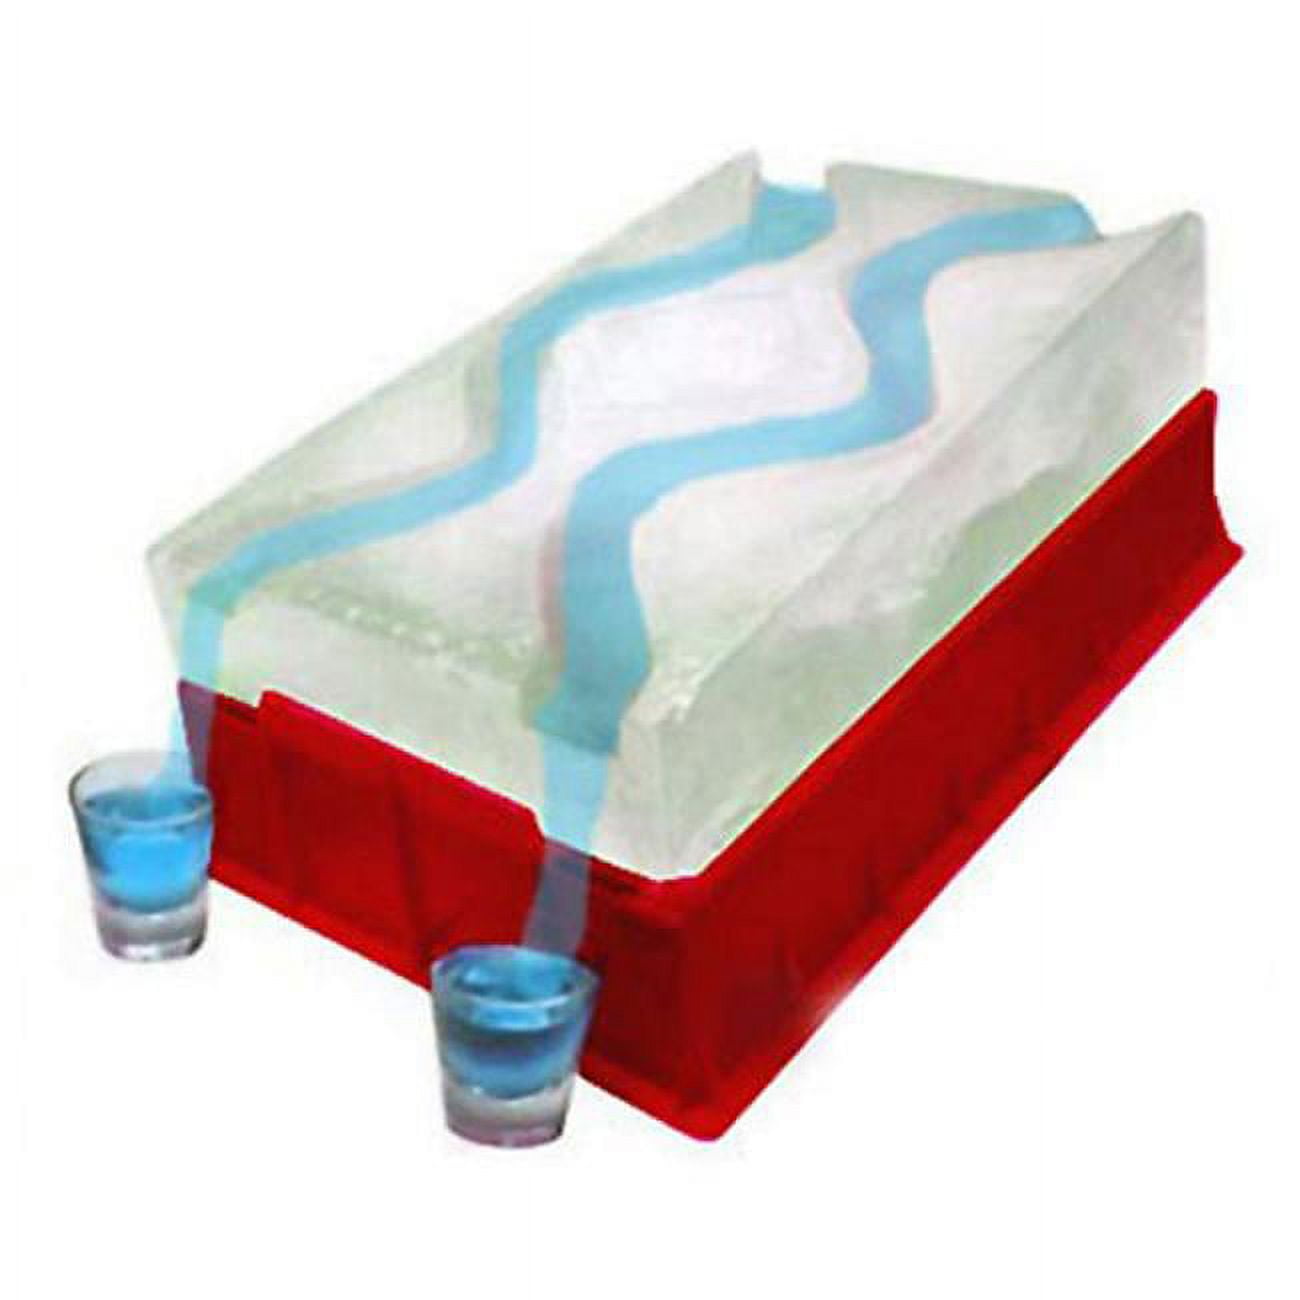 Drinking 19313 Ice Luge Ramp Tray Party Drinking Game